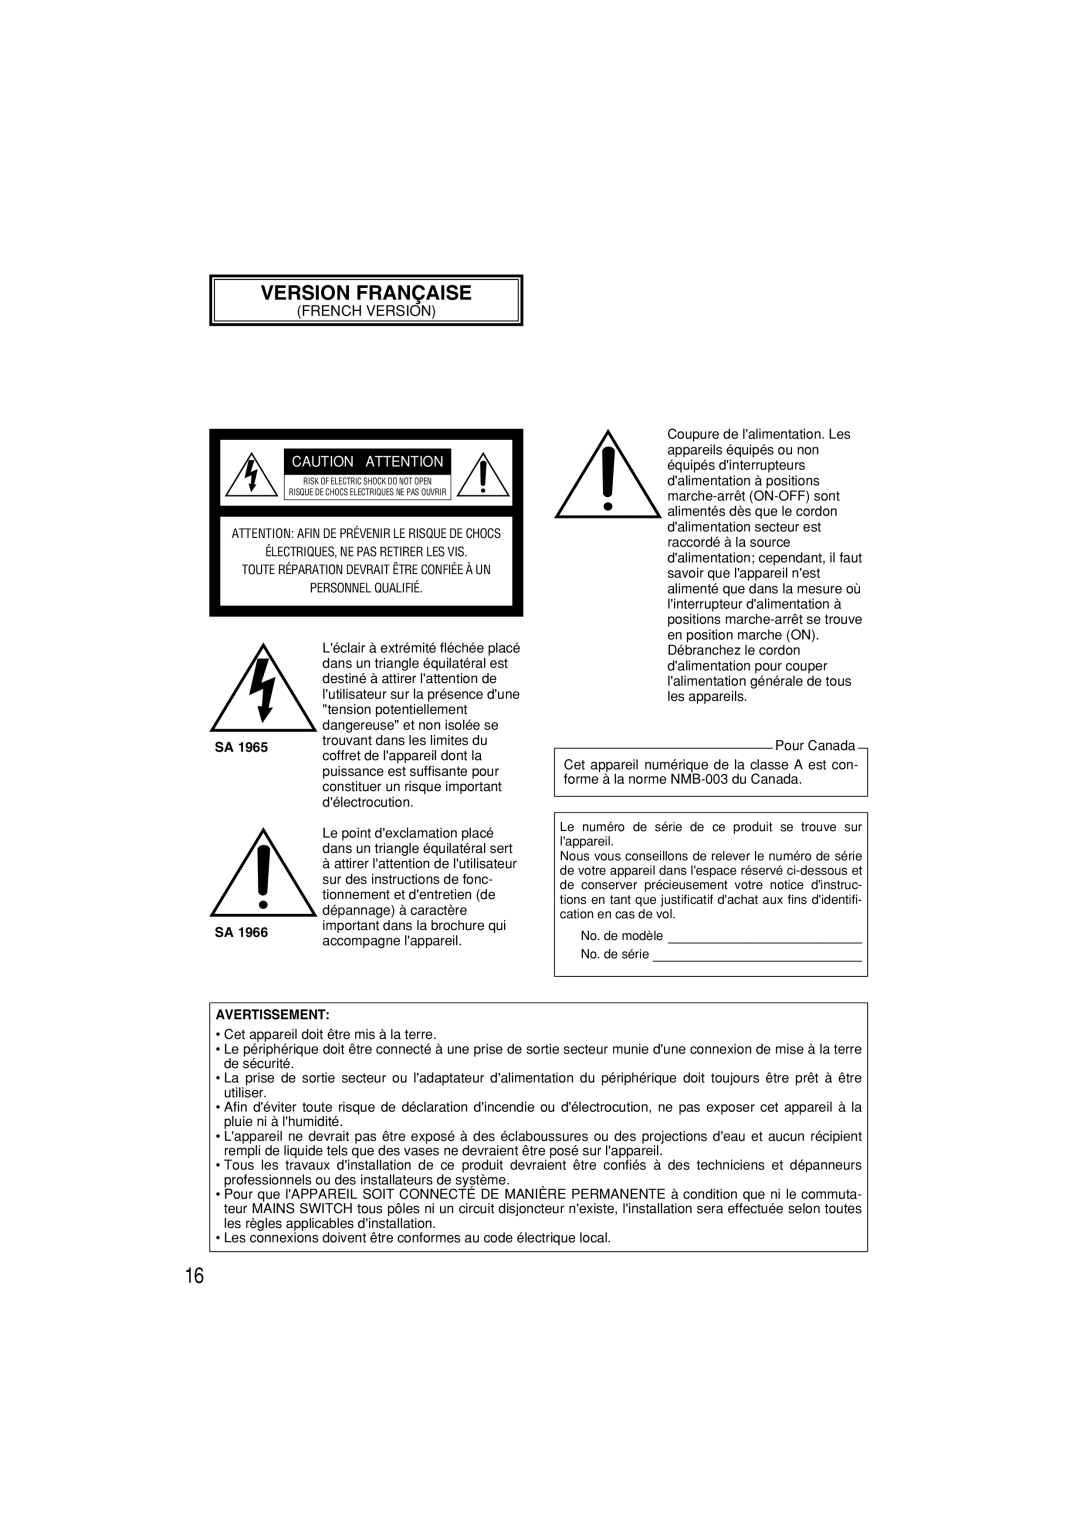 Panasonic WV-CP284, WV-CP280 operating instructions Version Française, French Version, Caution Attention, Avertissement 